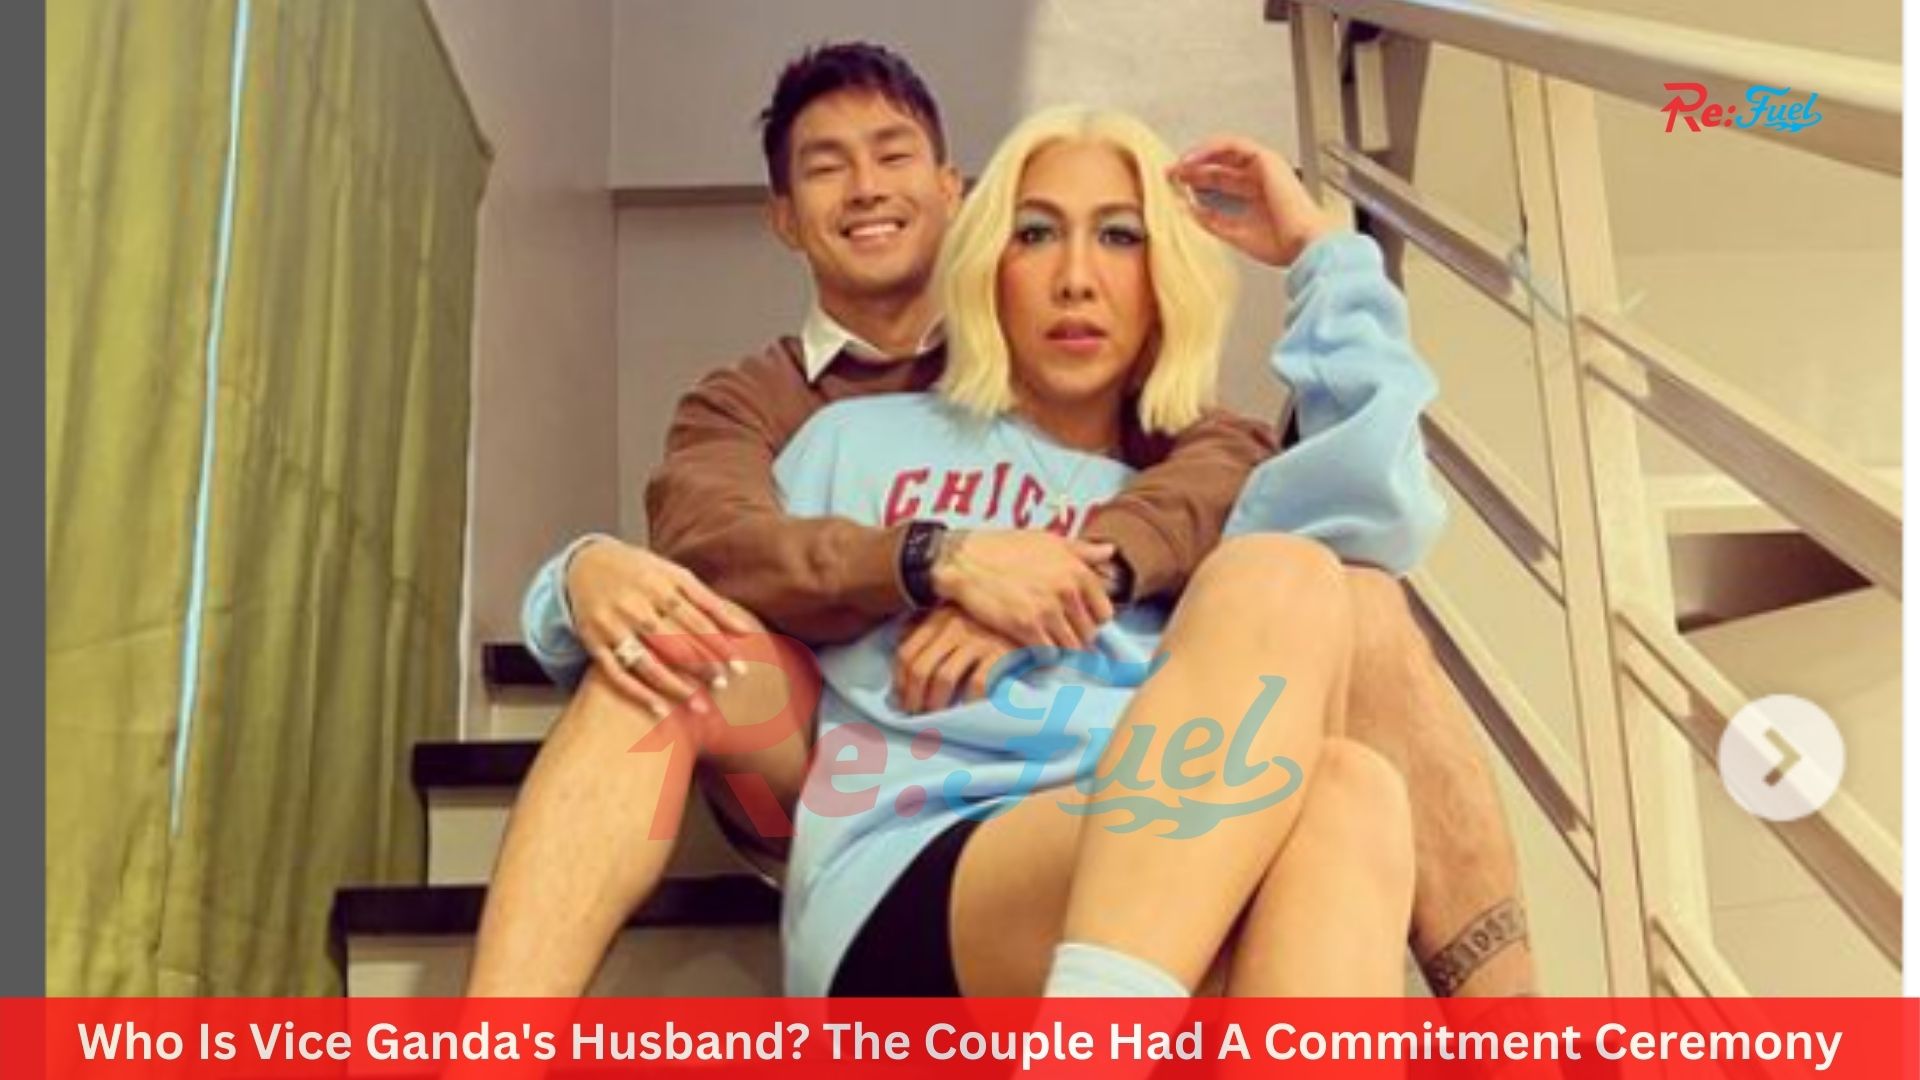 Who Is Vice Ganda's Husband? The Couple Had A Commitment Ceremony